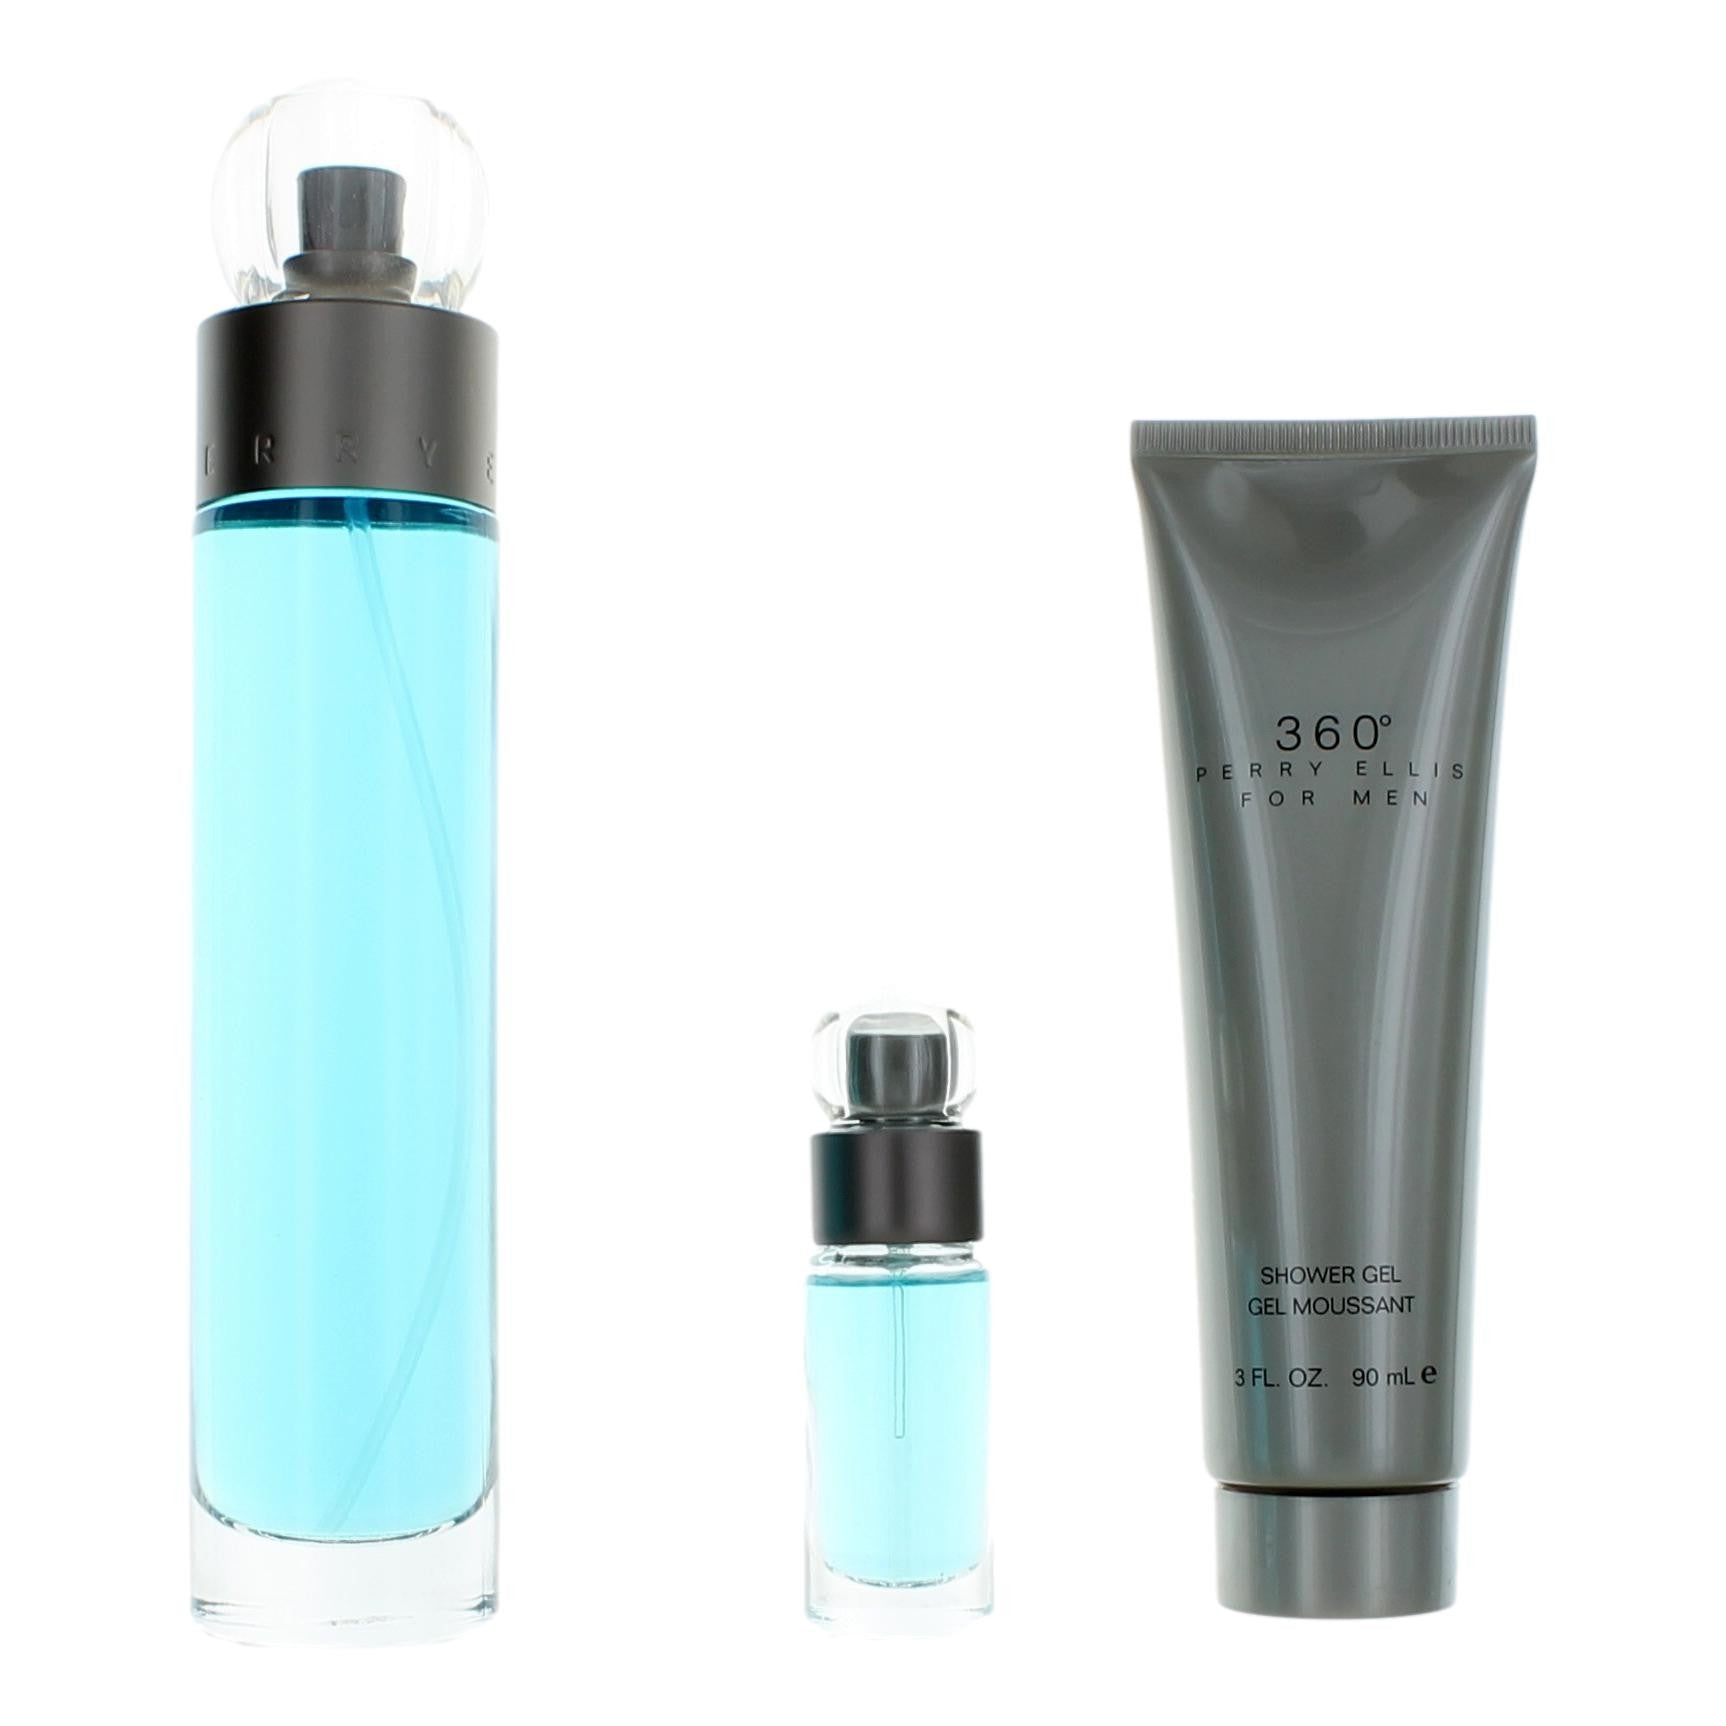 Perry Ellis 360 by Perry Ellis, 3 Piece Gift Set for Men.